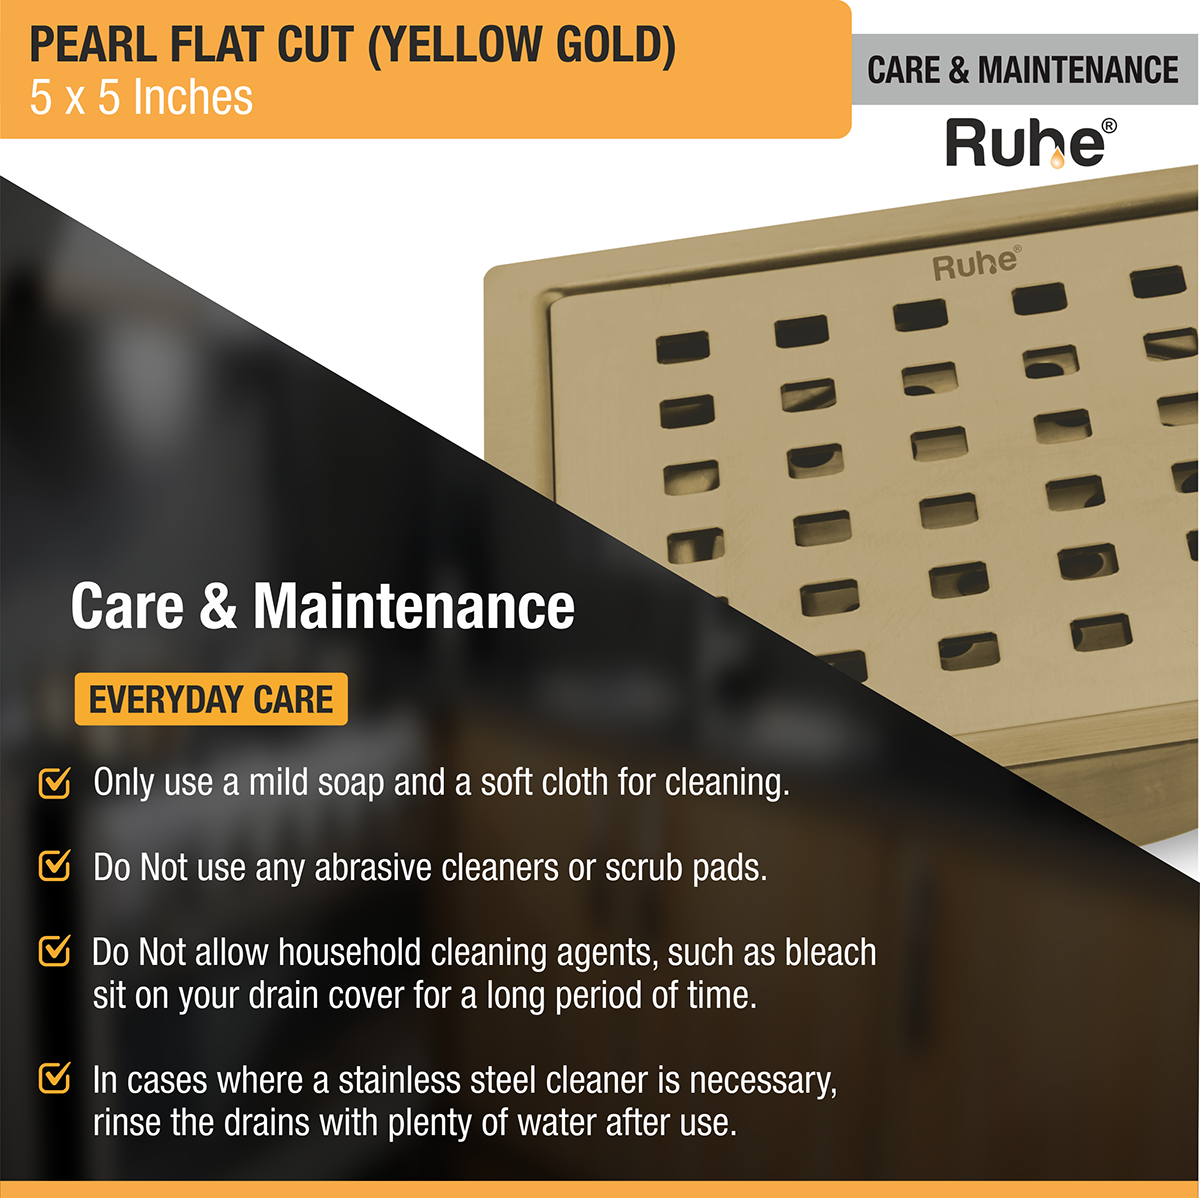 Pearl Square Flat Cut Floor Drain in Yellow Gold PVD Coating (5 x 5 Inches) care and maintenance